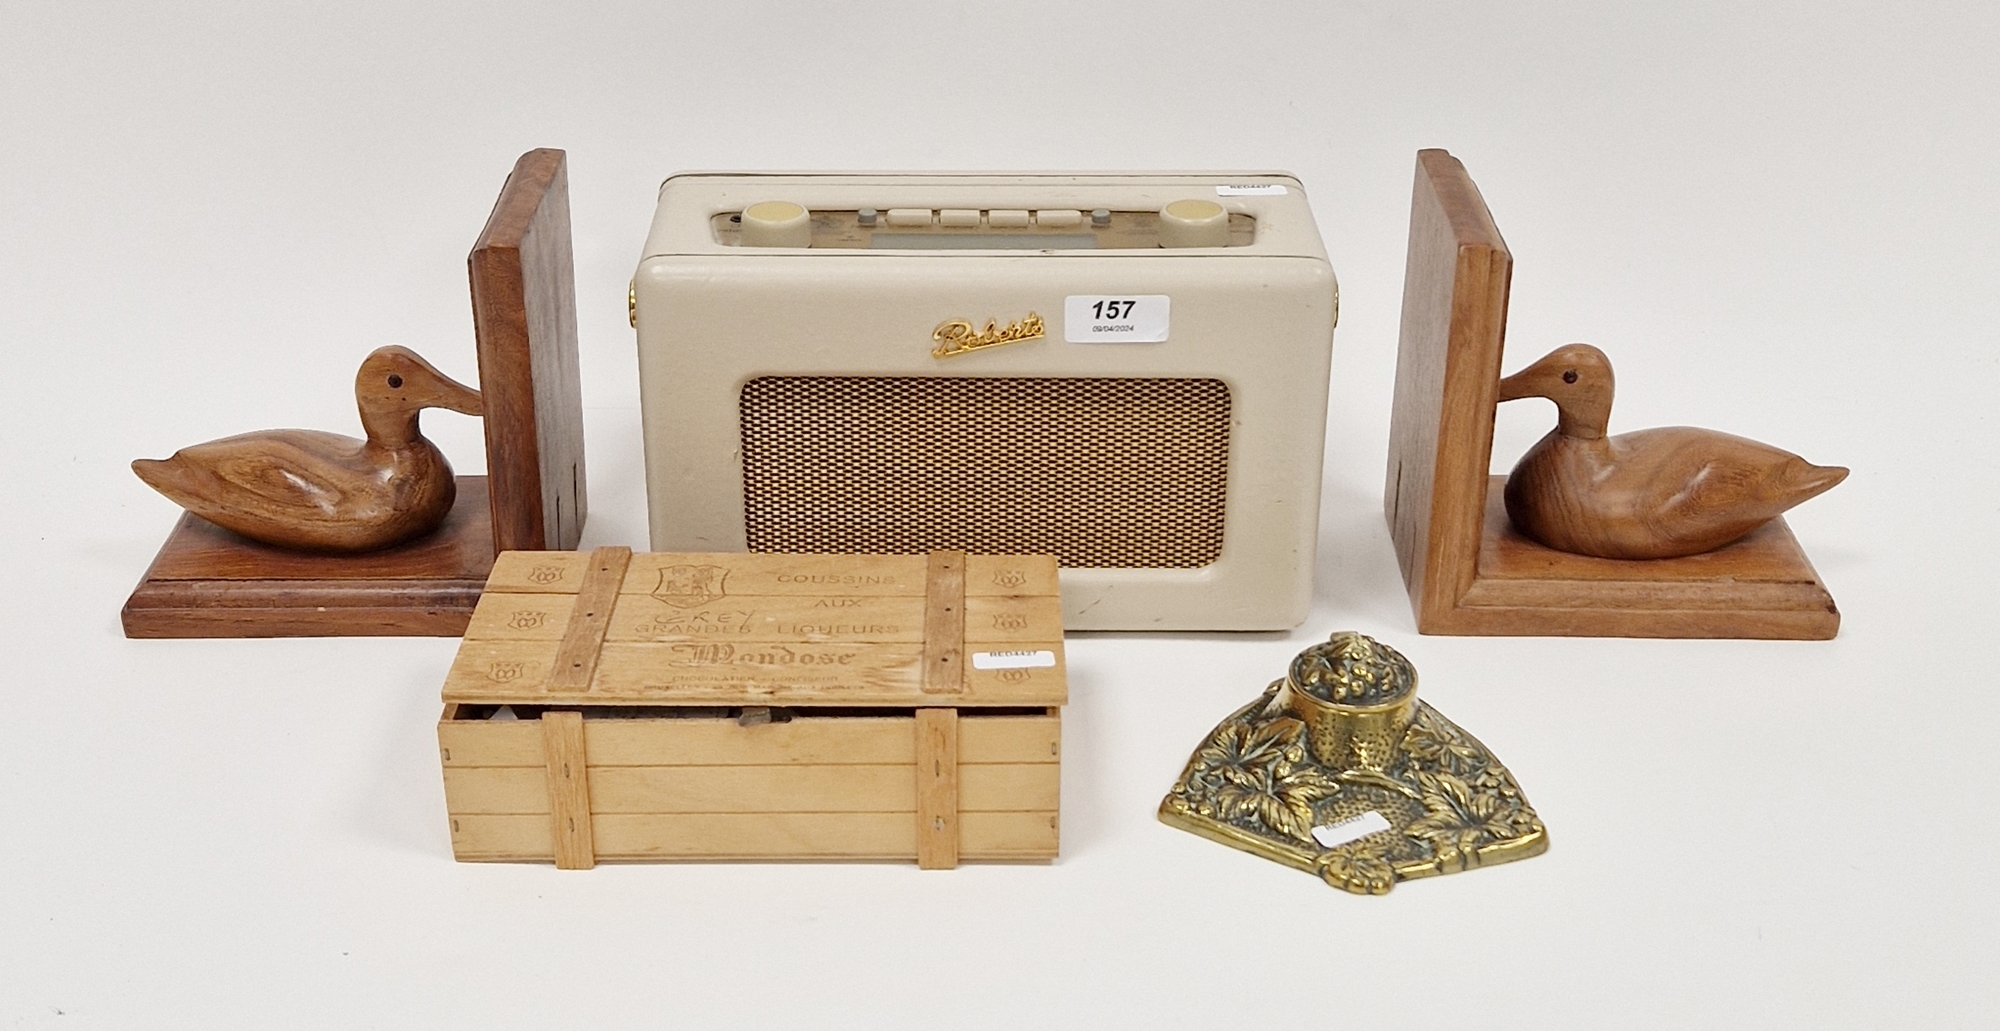 Roberts Revival DAB radio in cream (cream leather handle distressed), with original instructions, - Image 2 of 2